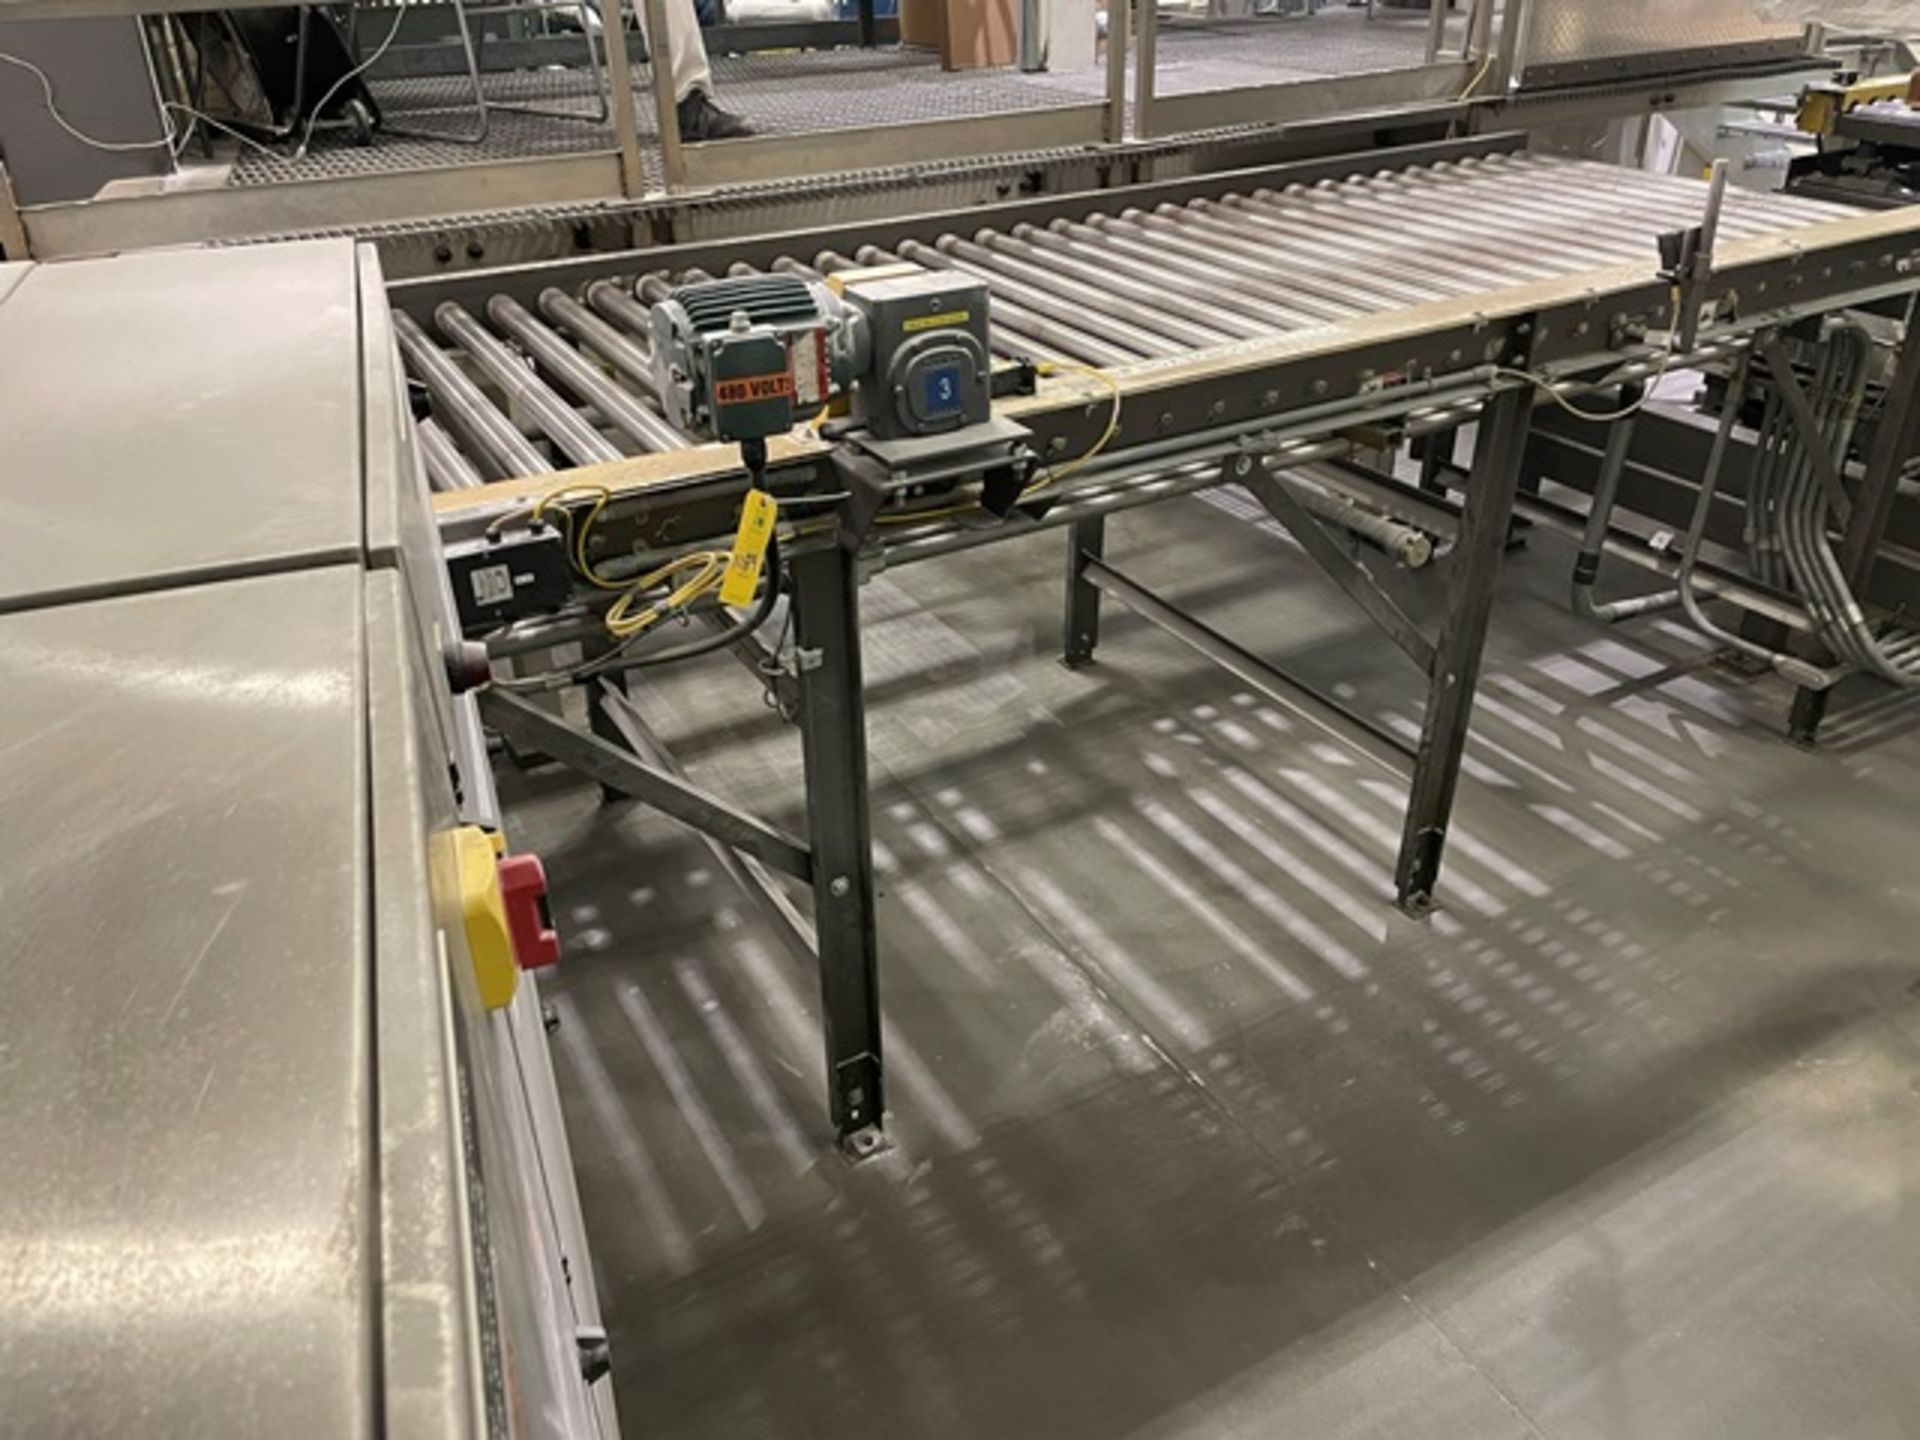 Motorized Roller Conveyor, Approx. 16' Length - Image 3 of 3